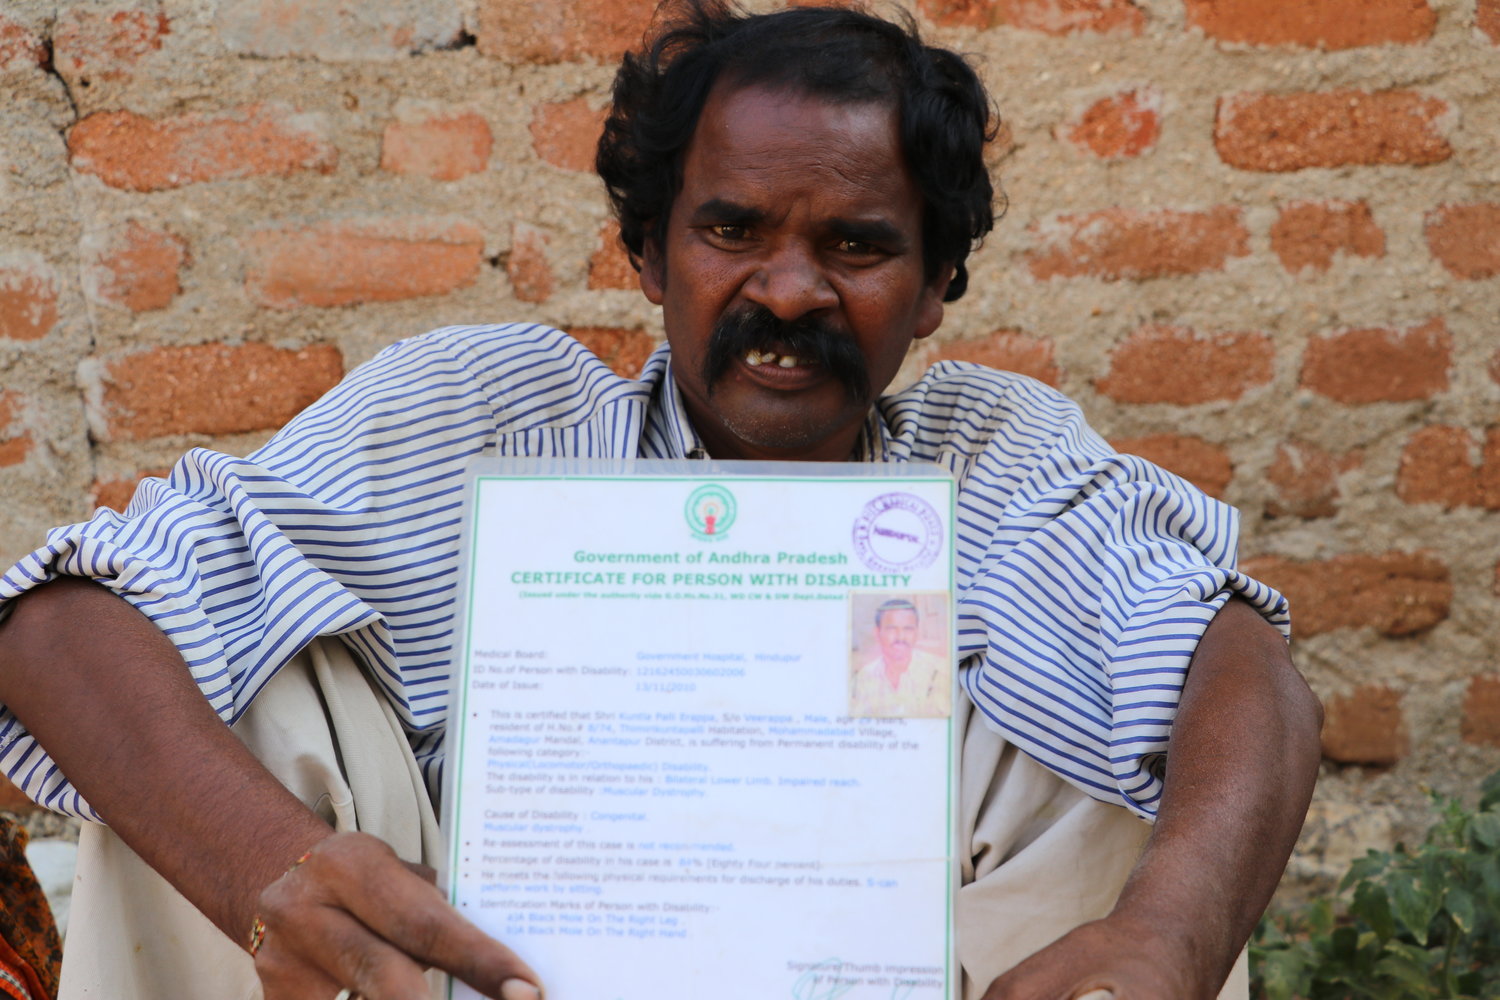 K. Veerappa stayed back in his village with his wife and elderly father while his friends left for cities looking for better prospects. He couldn't migrate due to his disability and is now struggling to make ends meet. (Pic courtesy: 101Reporters)